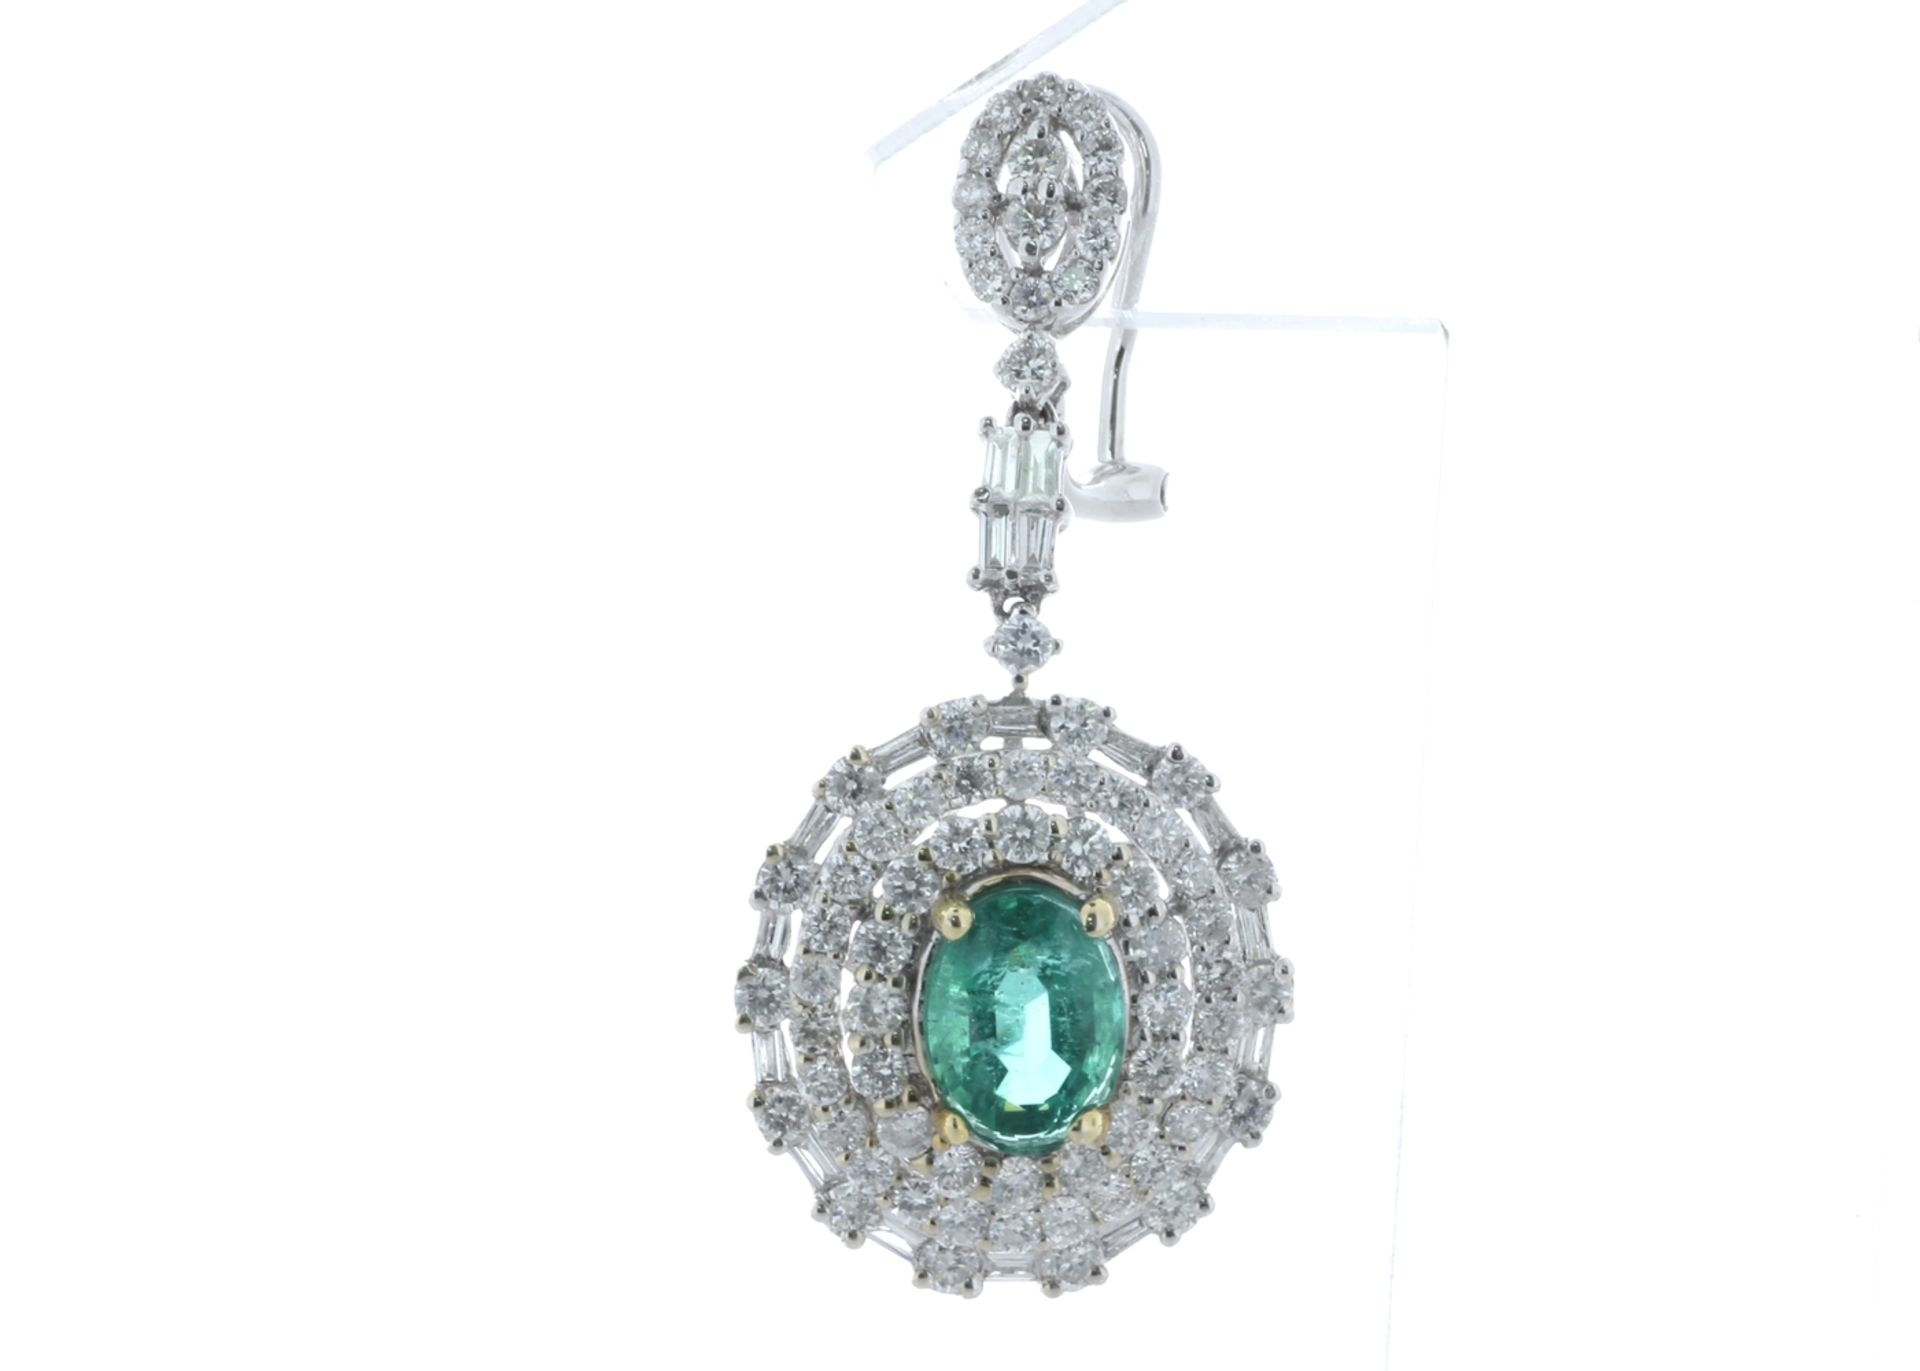 18ct White Gold Diamond And Emerald Drop Earrings (E2.61) 3.74 Carats - Valued by IDI £18,000.00 - - Image 4 of 5